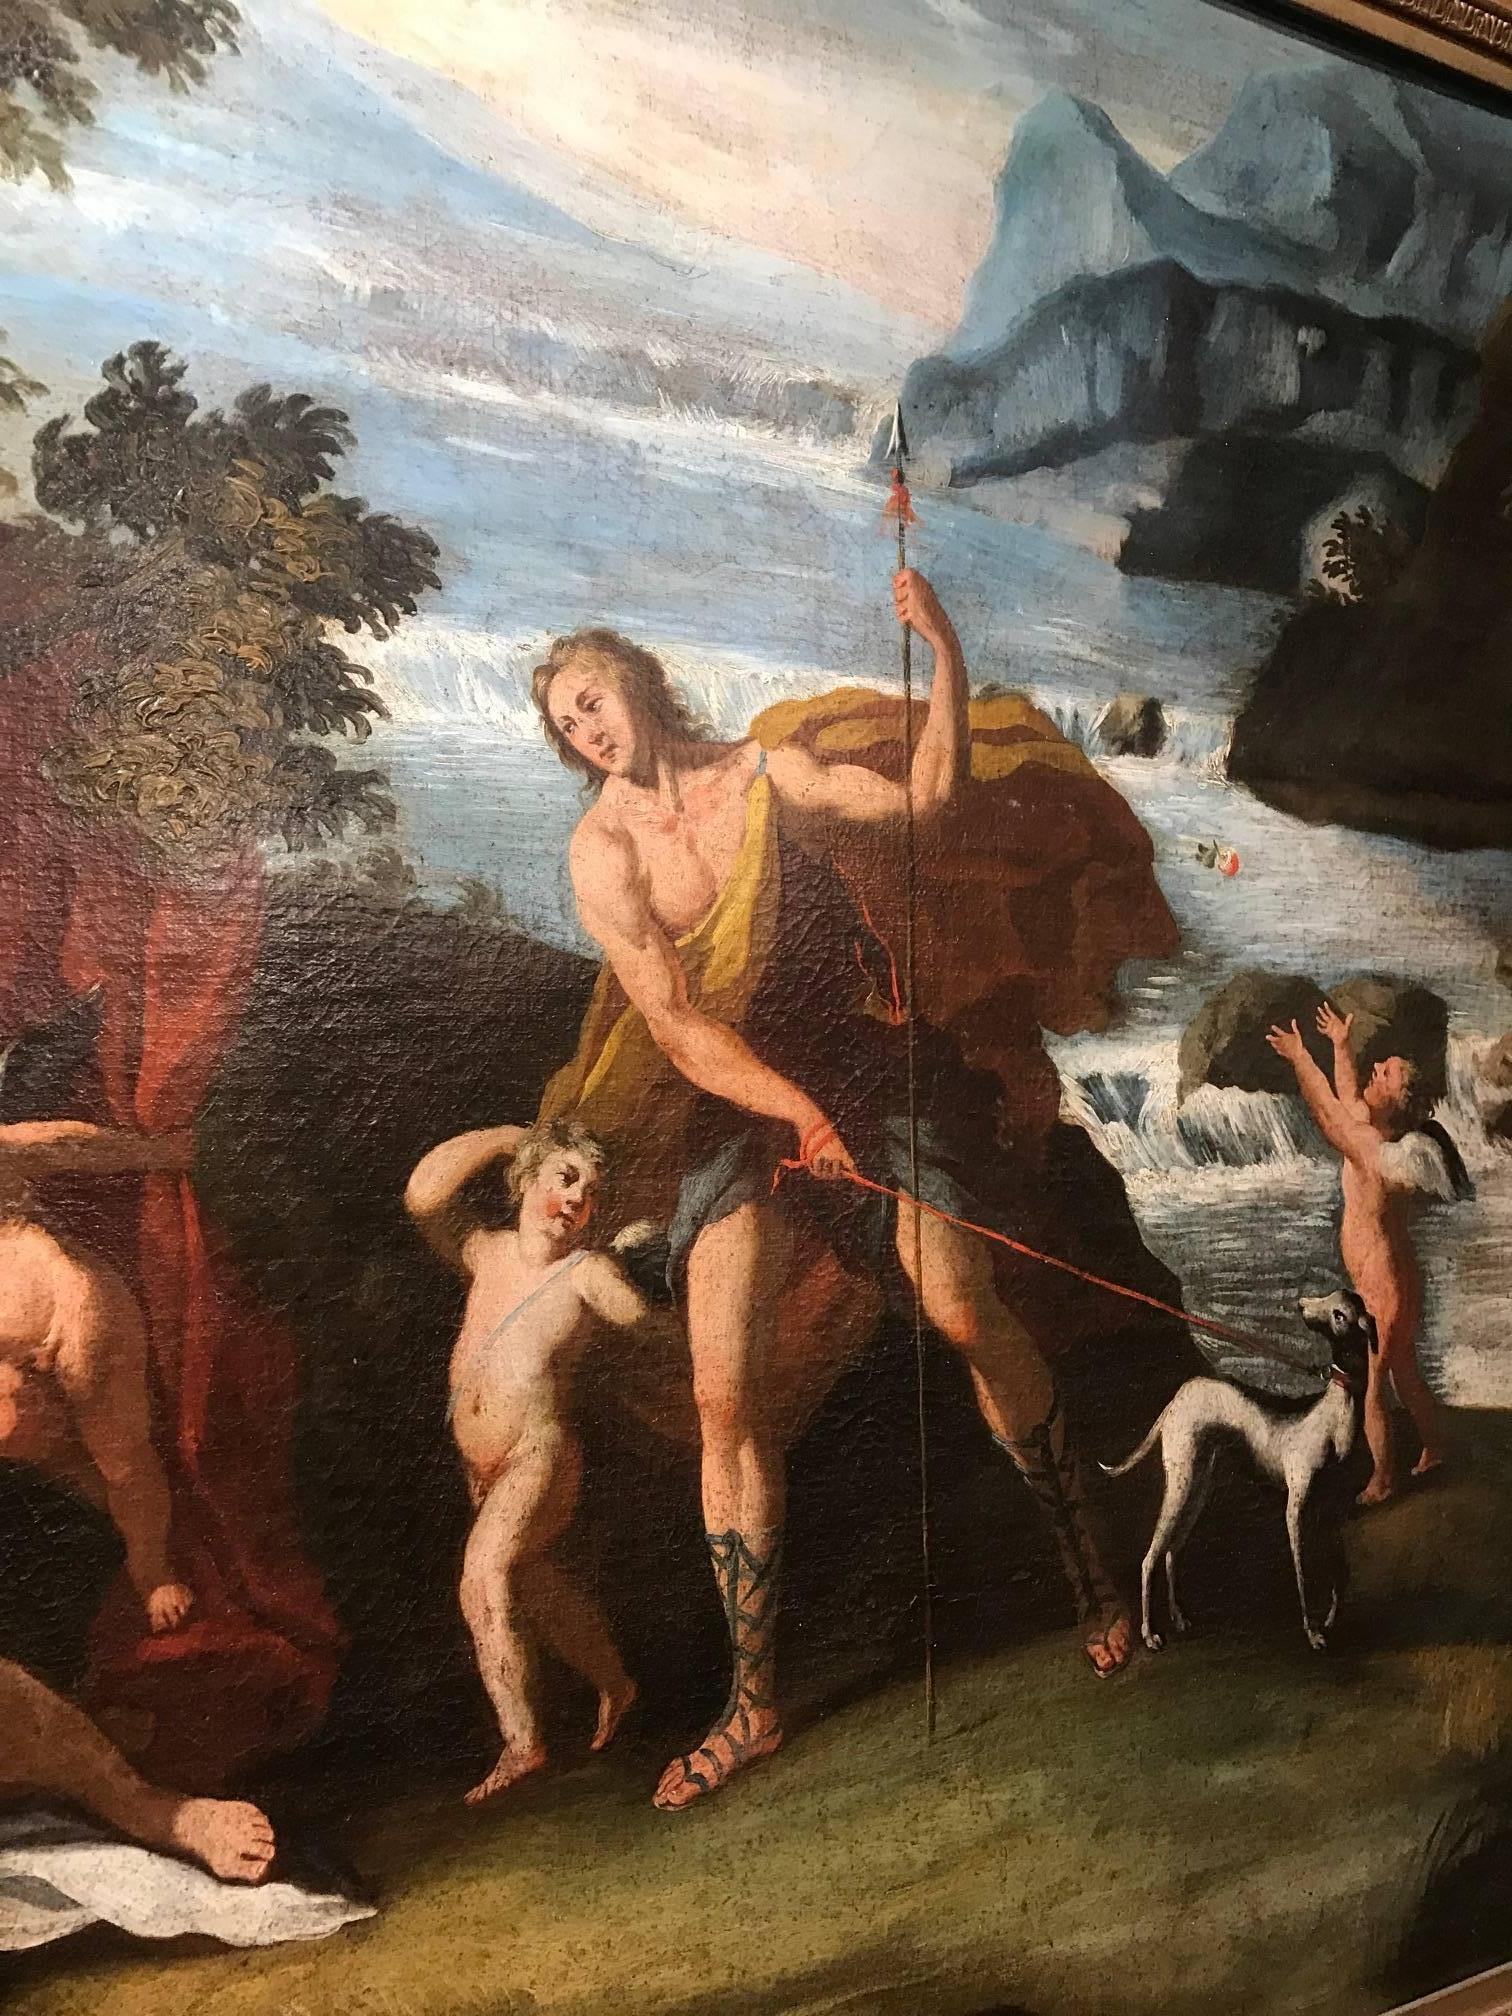 Garden of Eden scene, Adam and Eve debating about the apple, before the apple was eating. Provenance: Newport estate, Rhode Island.